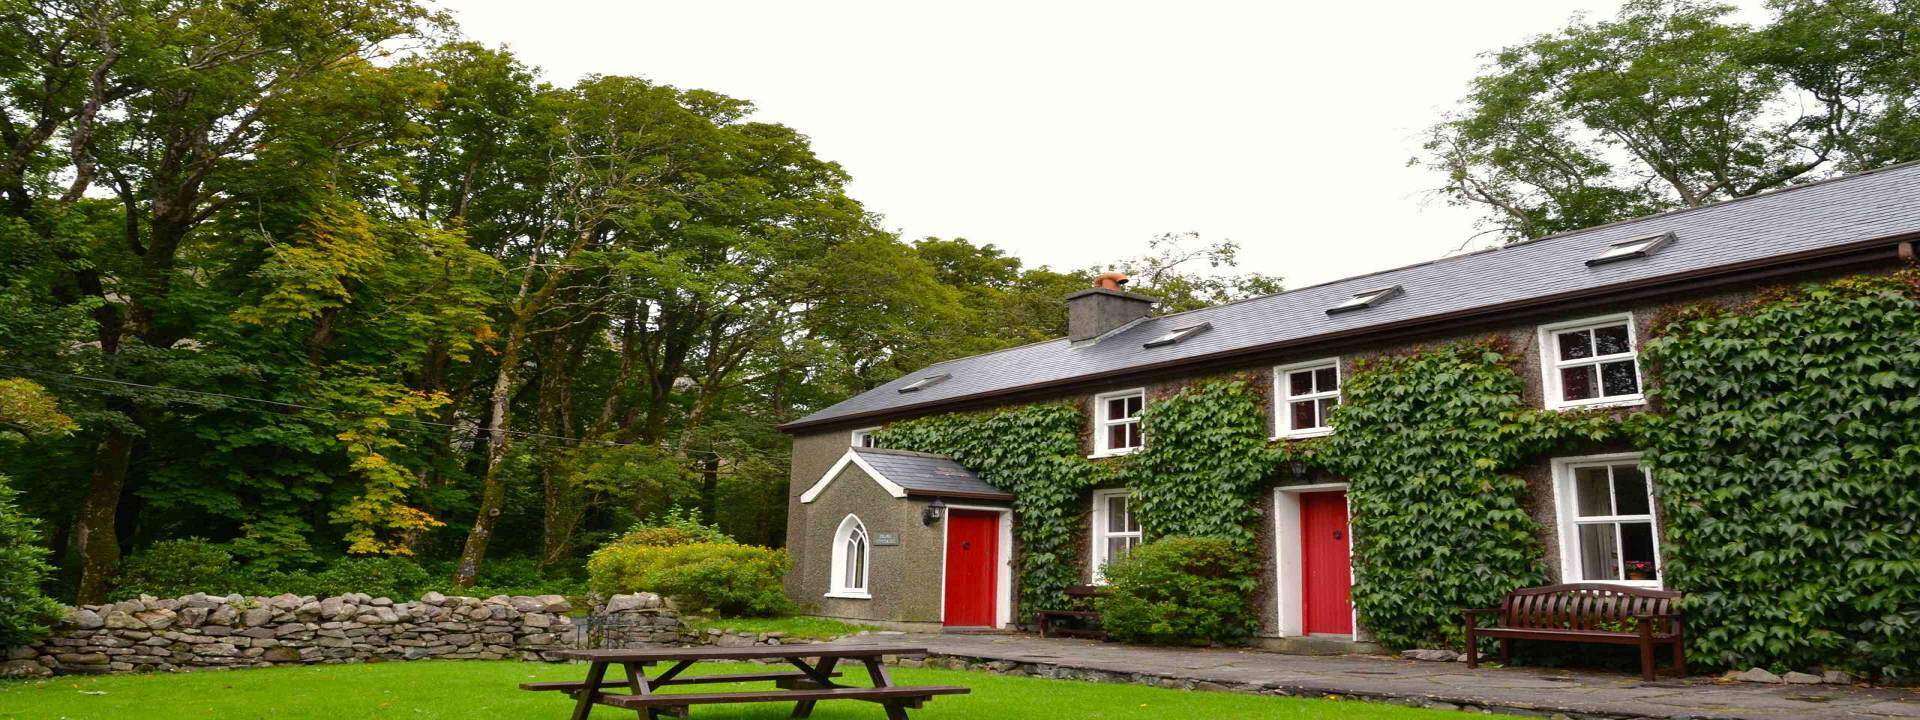 self catering cottages ireland